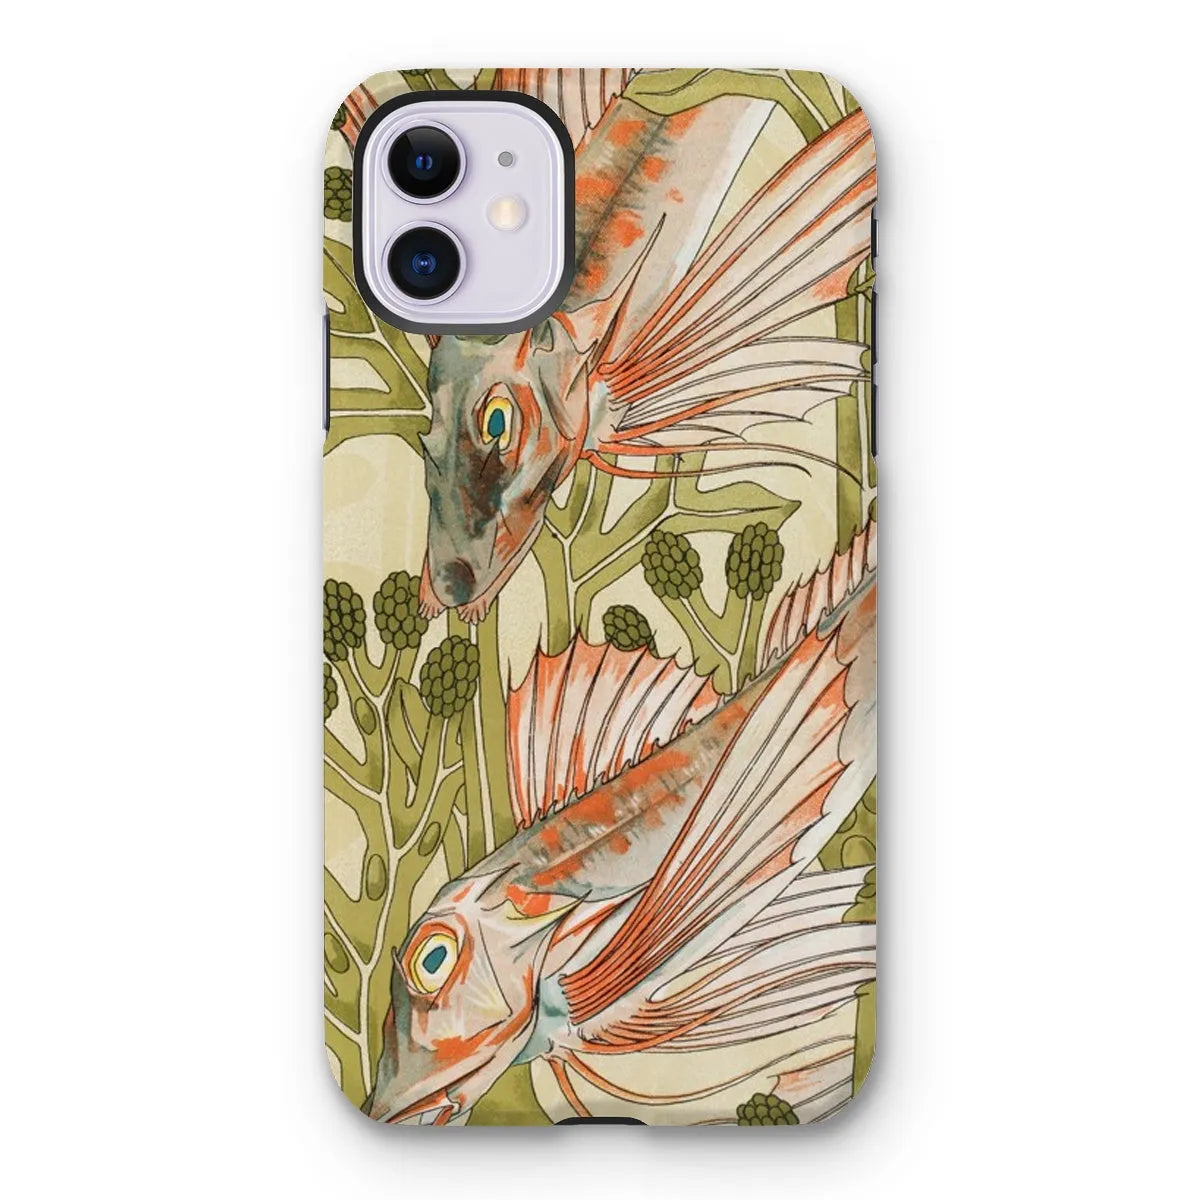 Red Fish - Animal Art Phone Case - Maurice Pillard Verneuil - Iphone 11 / Matte - Mobile Phone Cases - Aesthetic Art